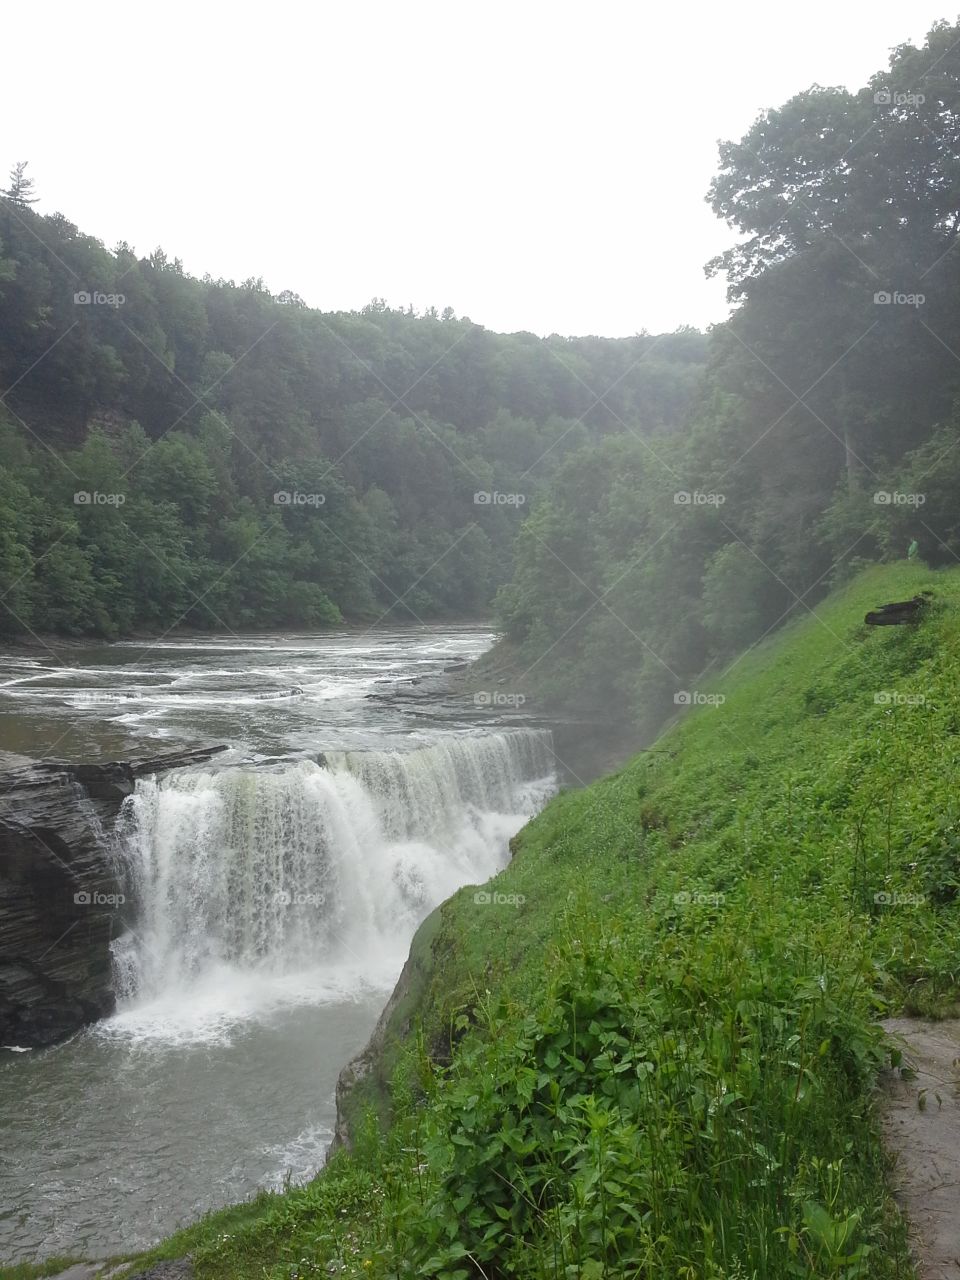 Middle Falls at Letchworth State Park